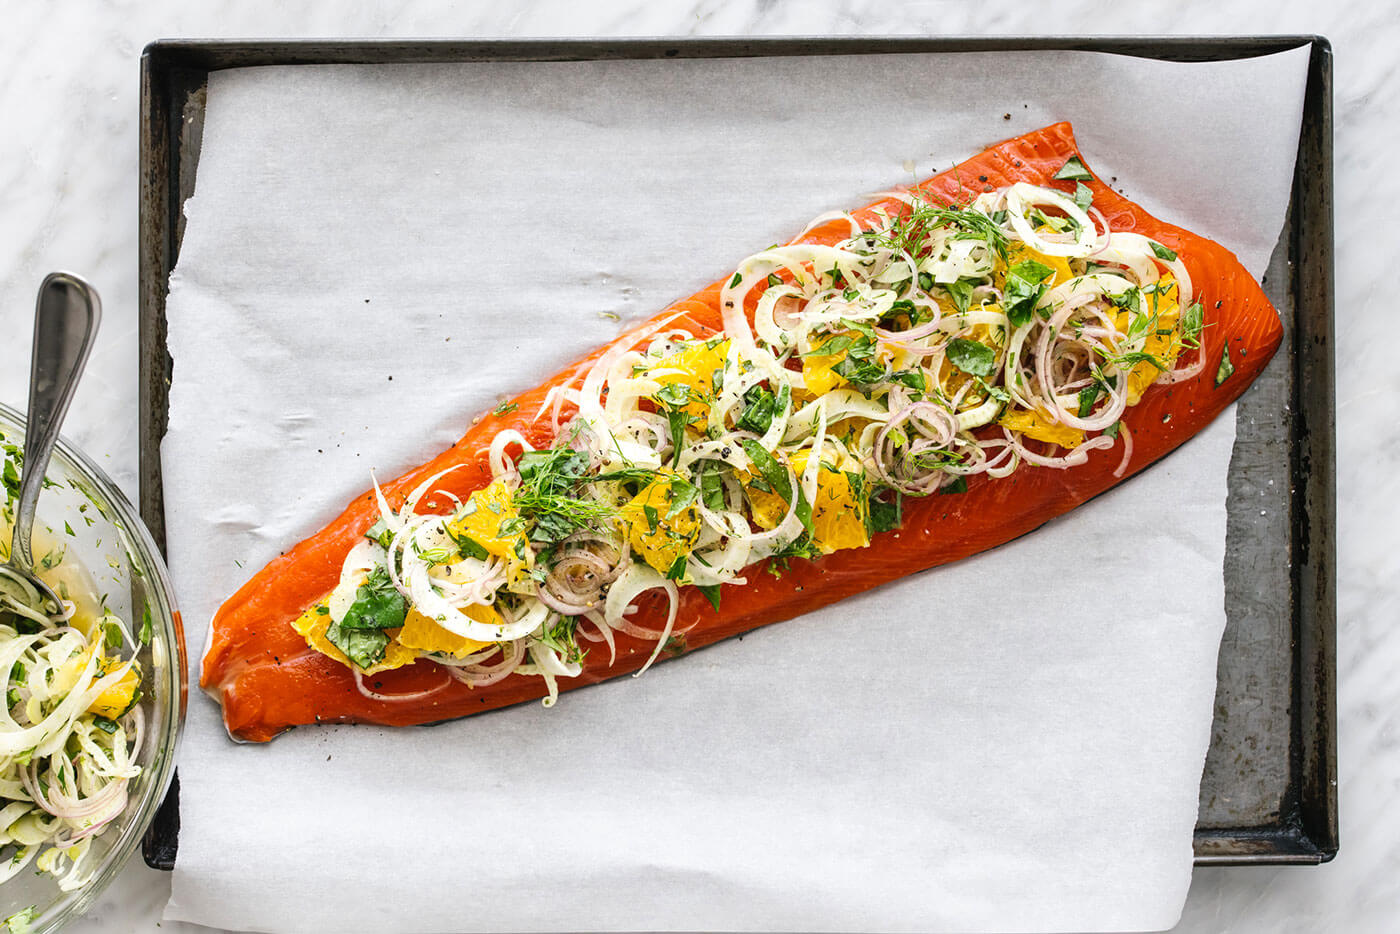 A whole slow roasted salmon with fennel orange topping on a lined baking sheet.